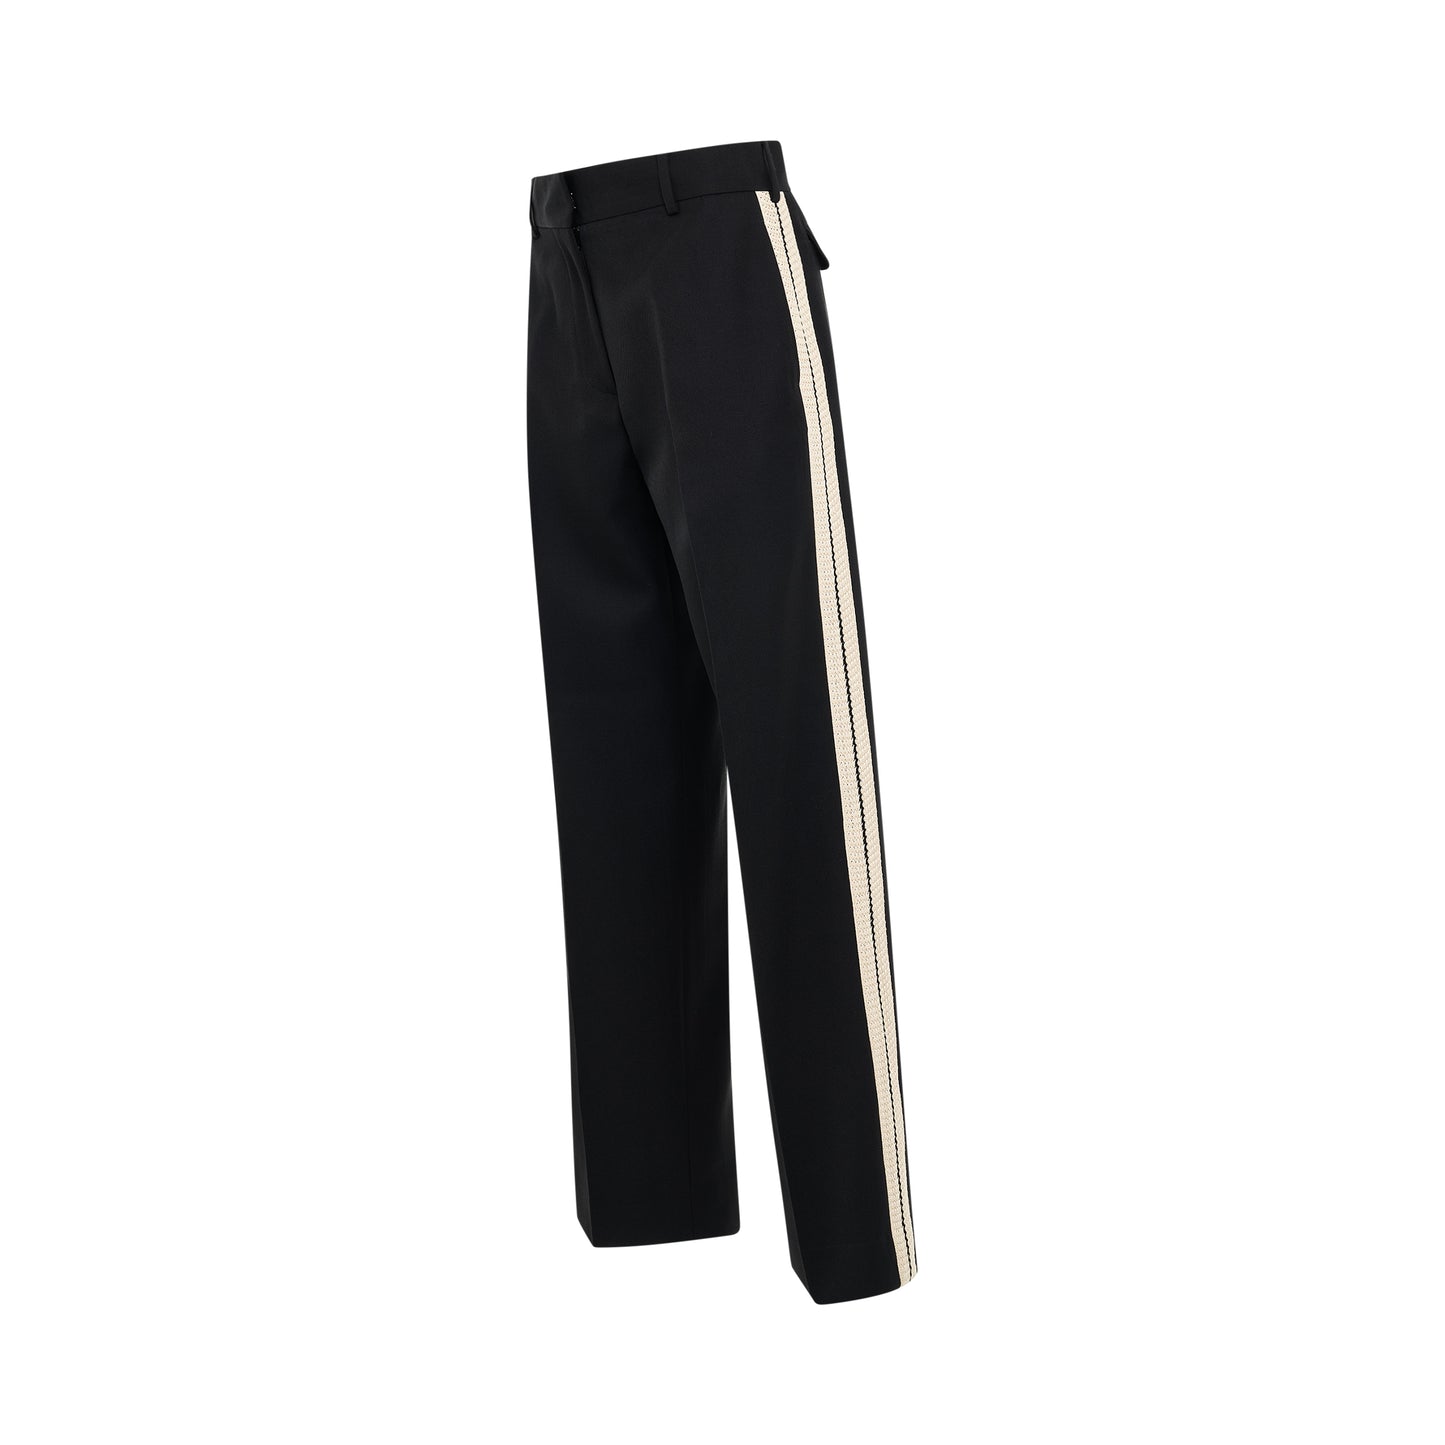 Knit Tape Suit Pants in Black/Off White